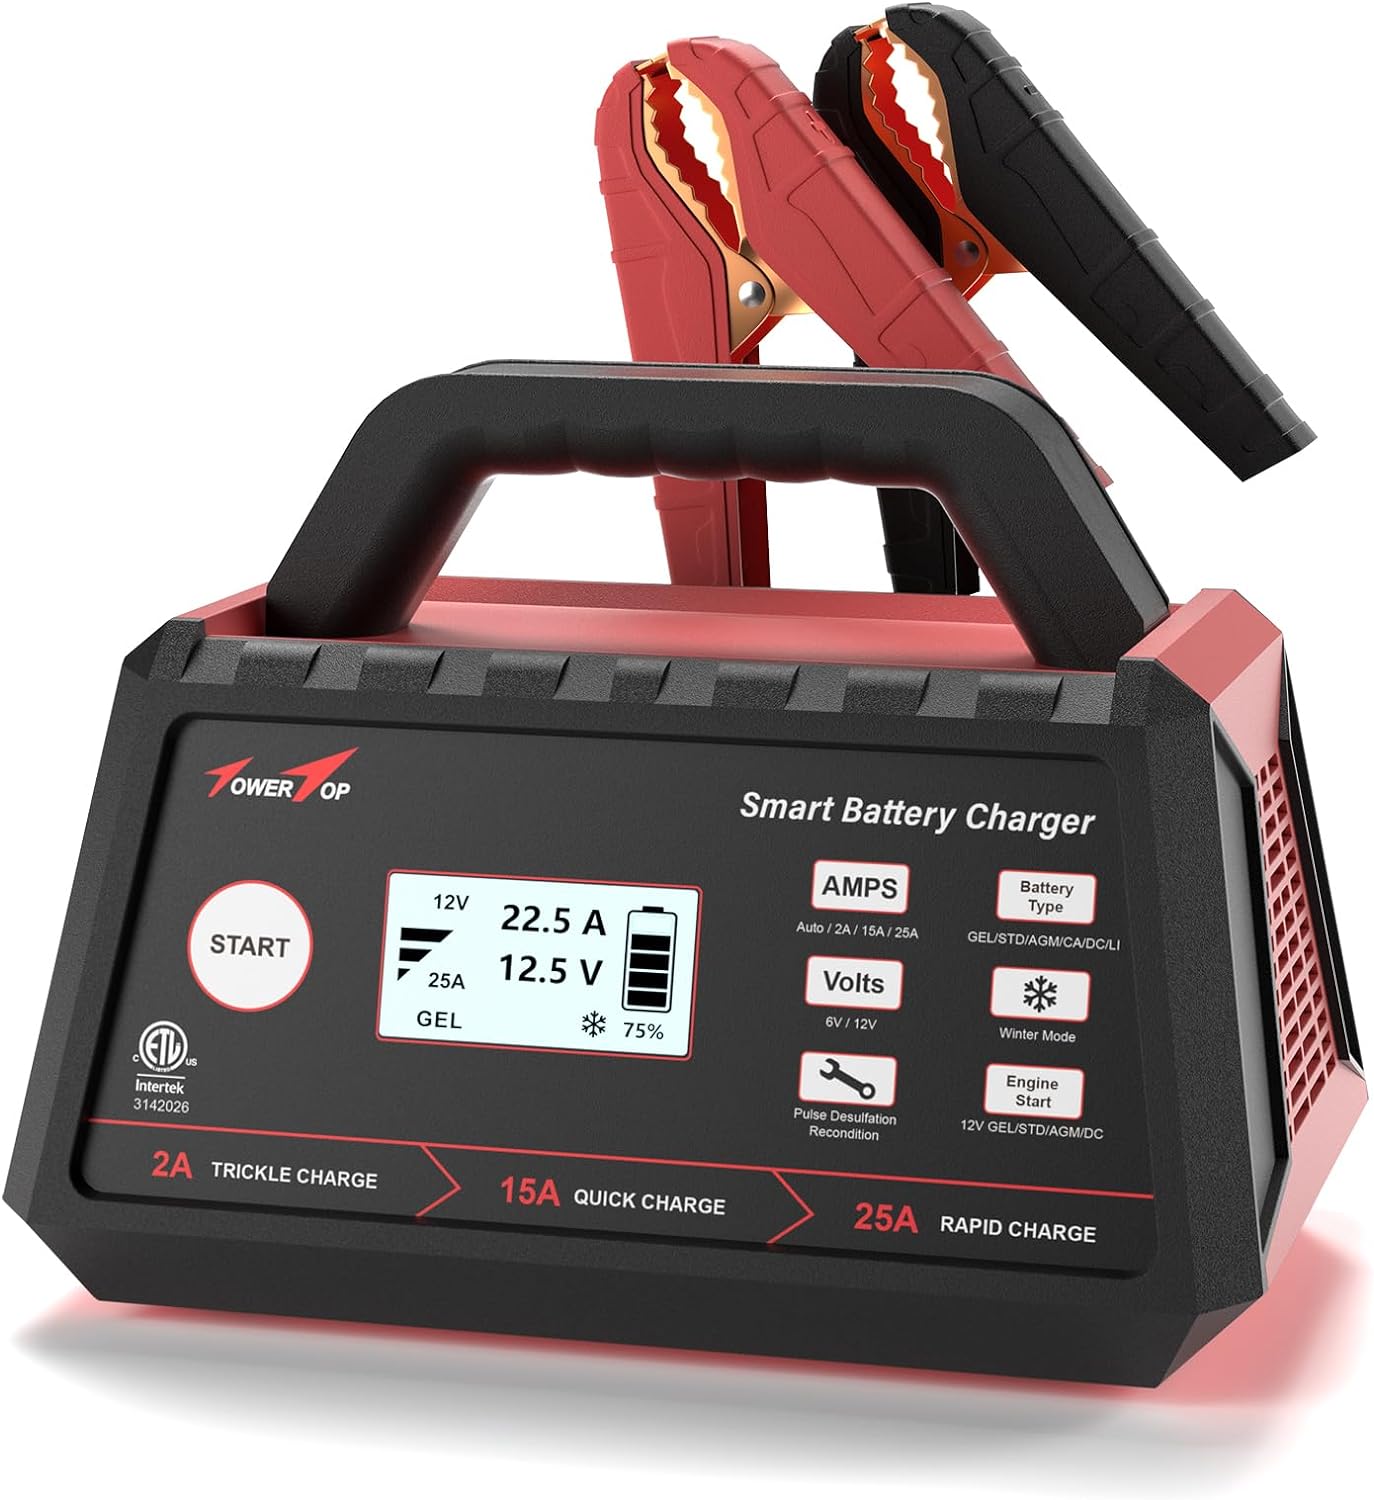 TowerTop Car Battery Charger Review